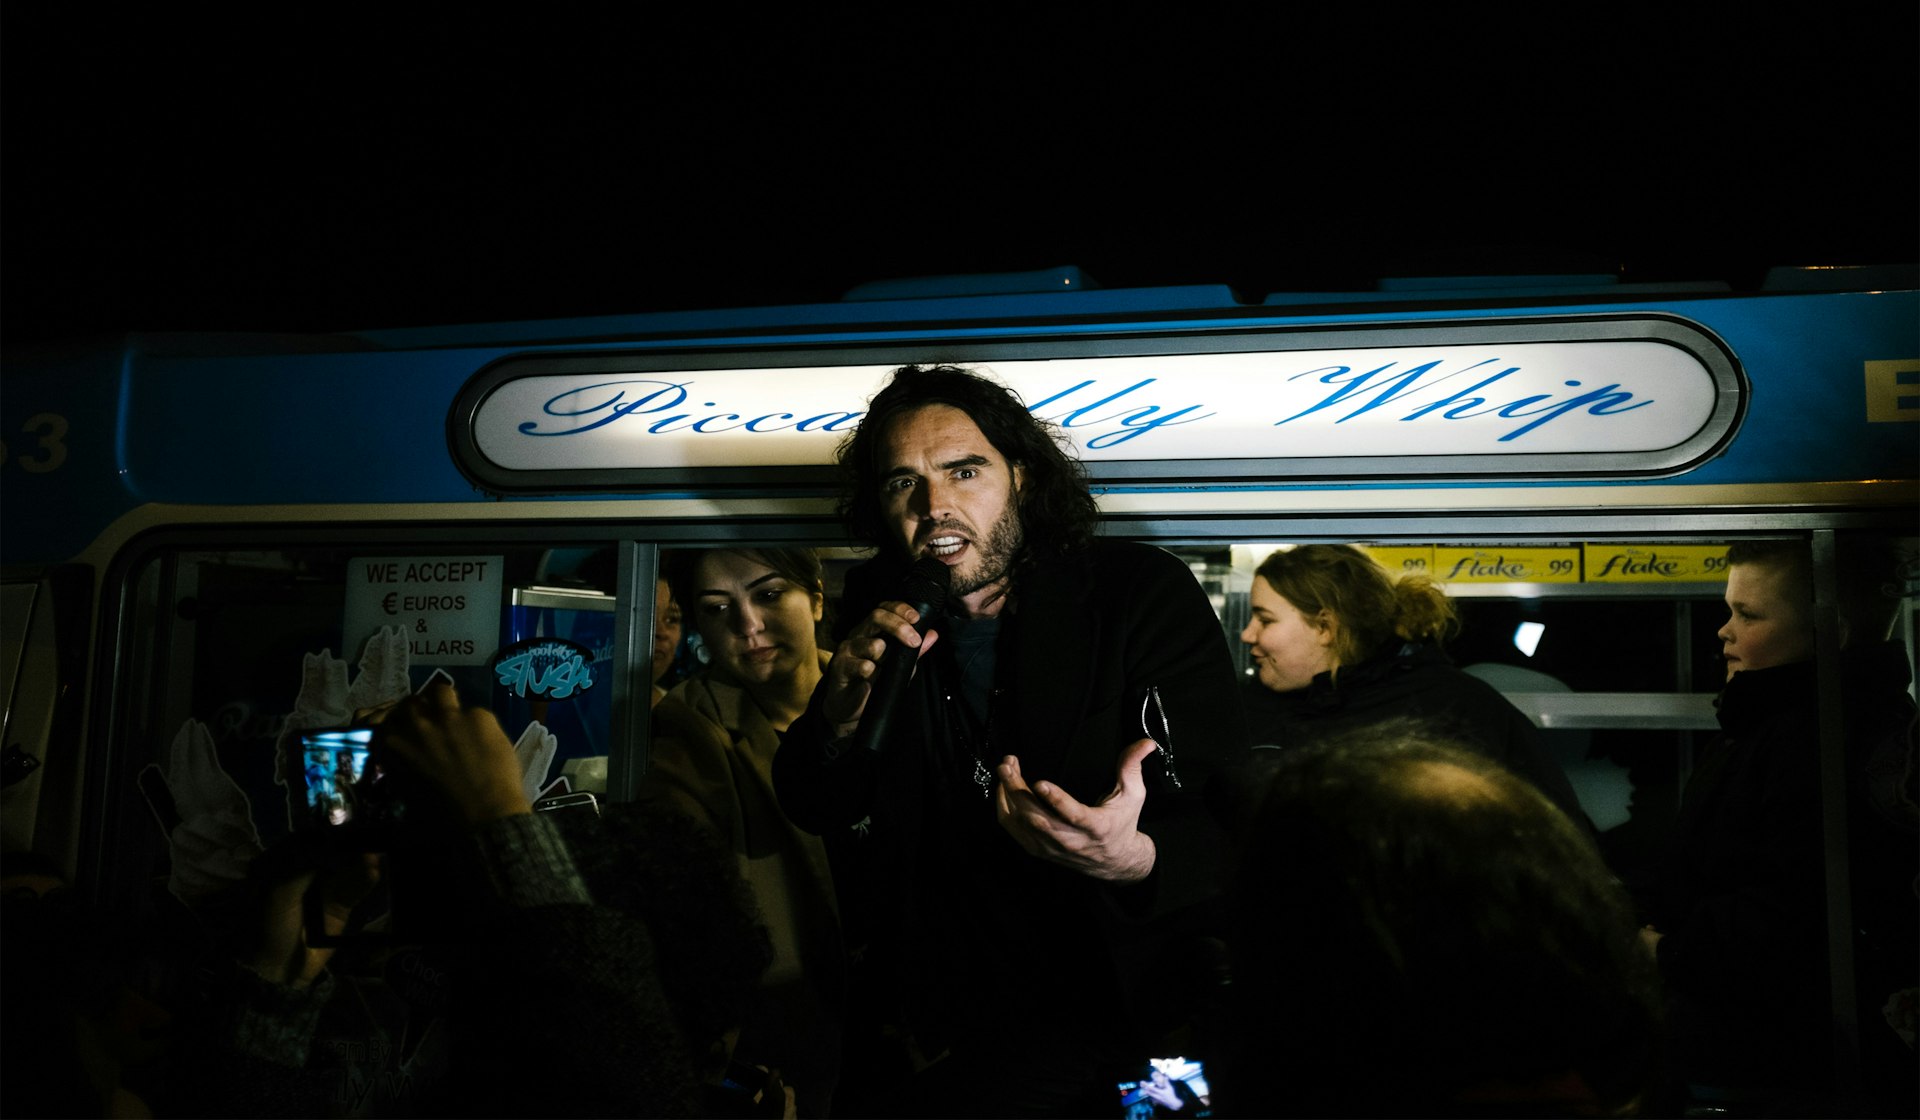 Community is the true star of Russell Brand's revolution